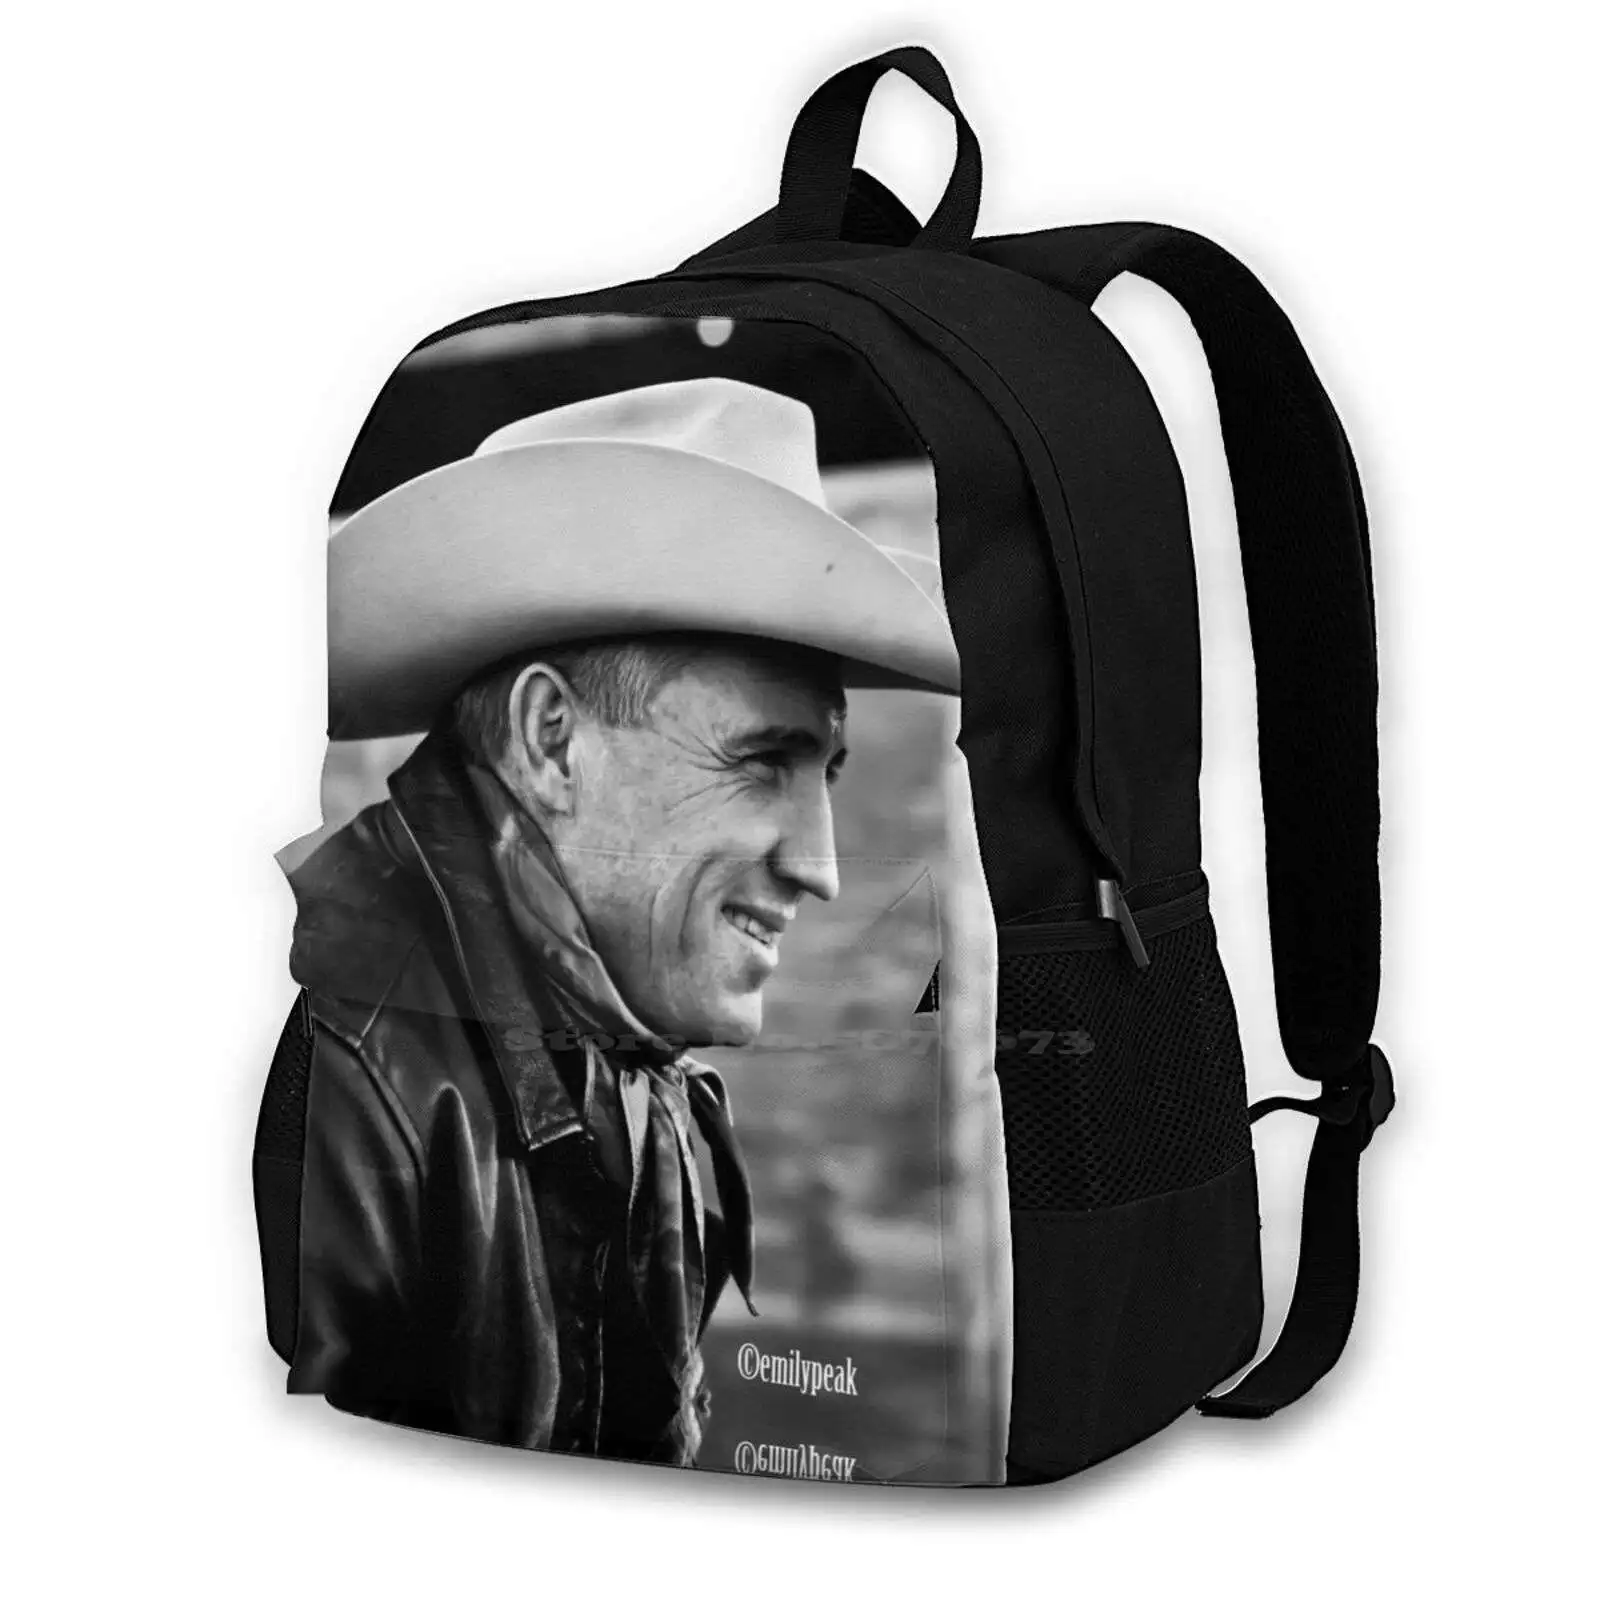 

Mozaun Teen College Student Backpack Laptop Travel Bags Cowboy